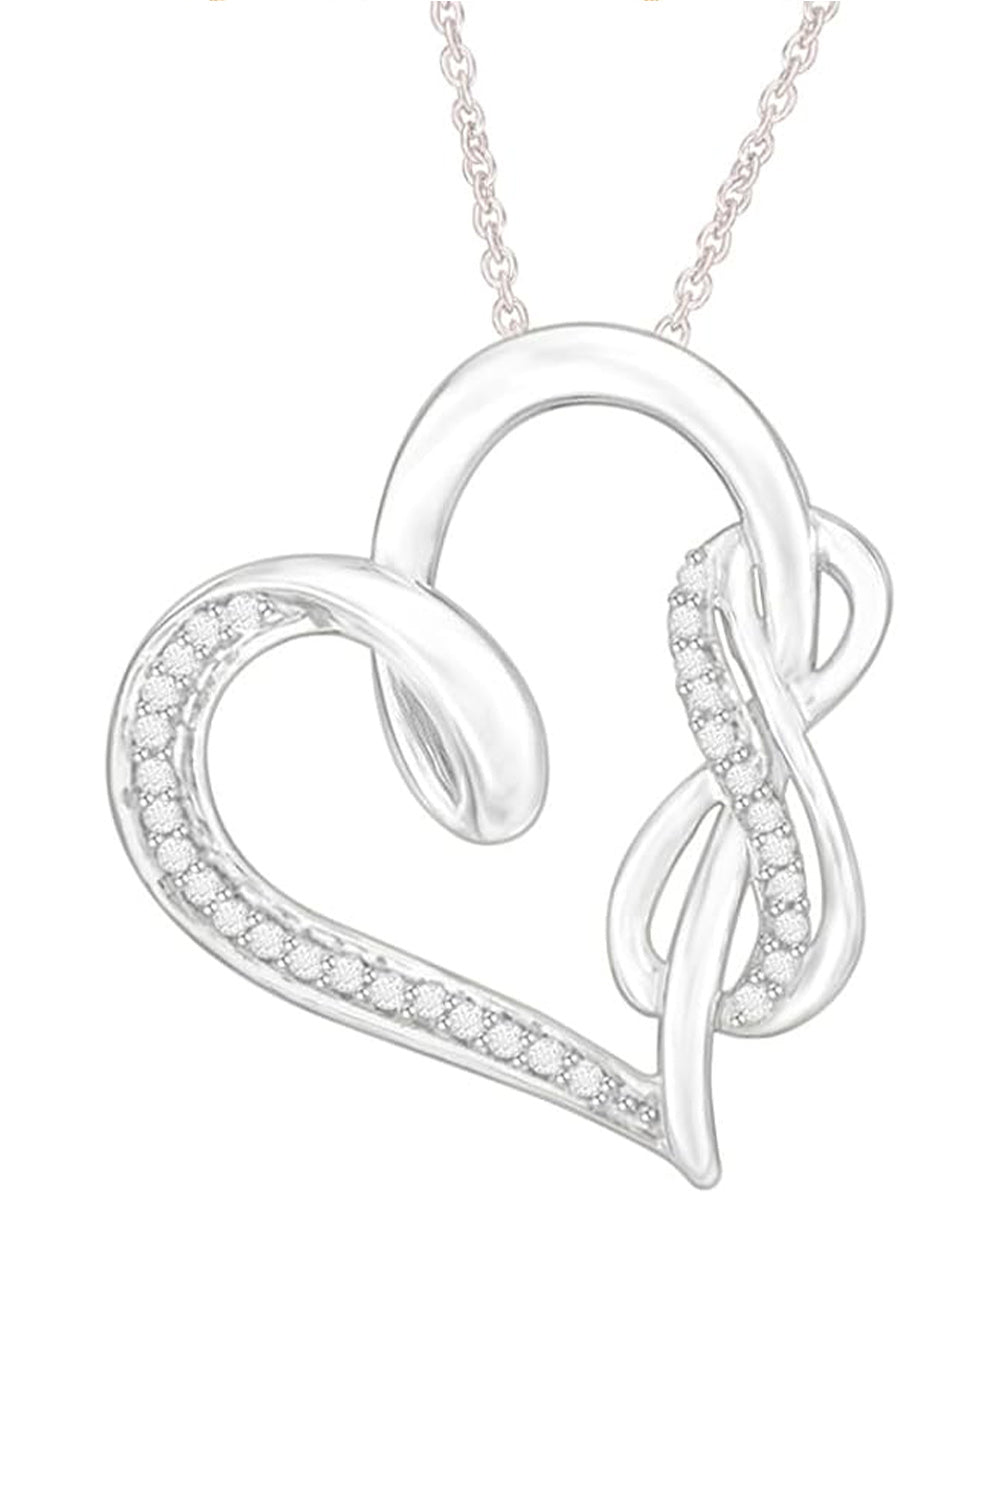 White Gold Color Infinity and Swirl Heart Pendant